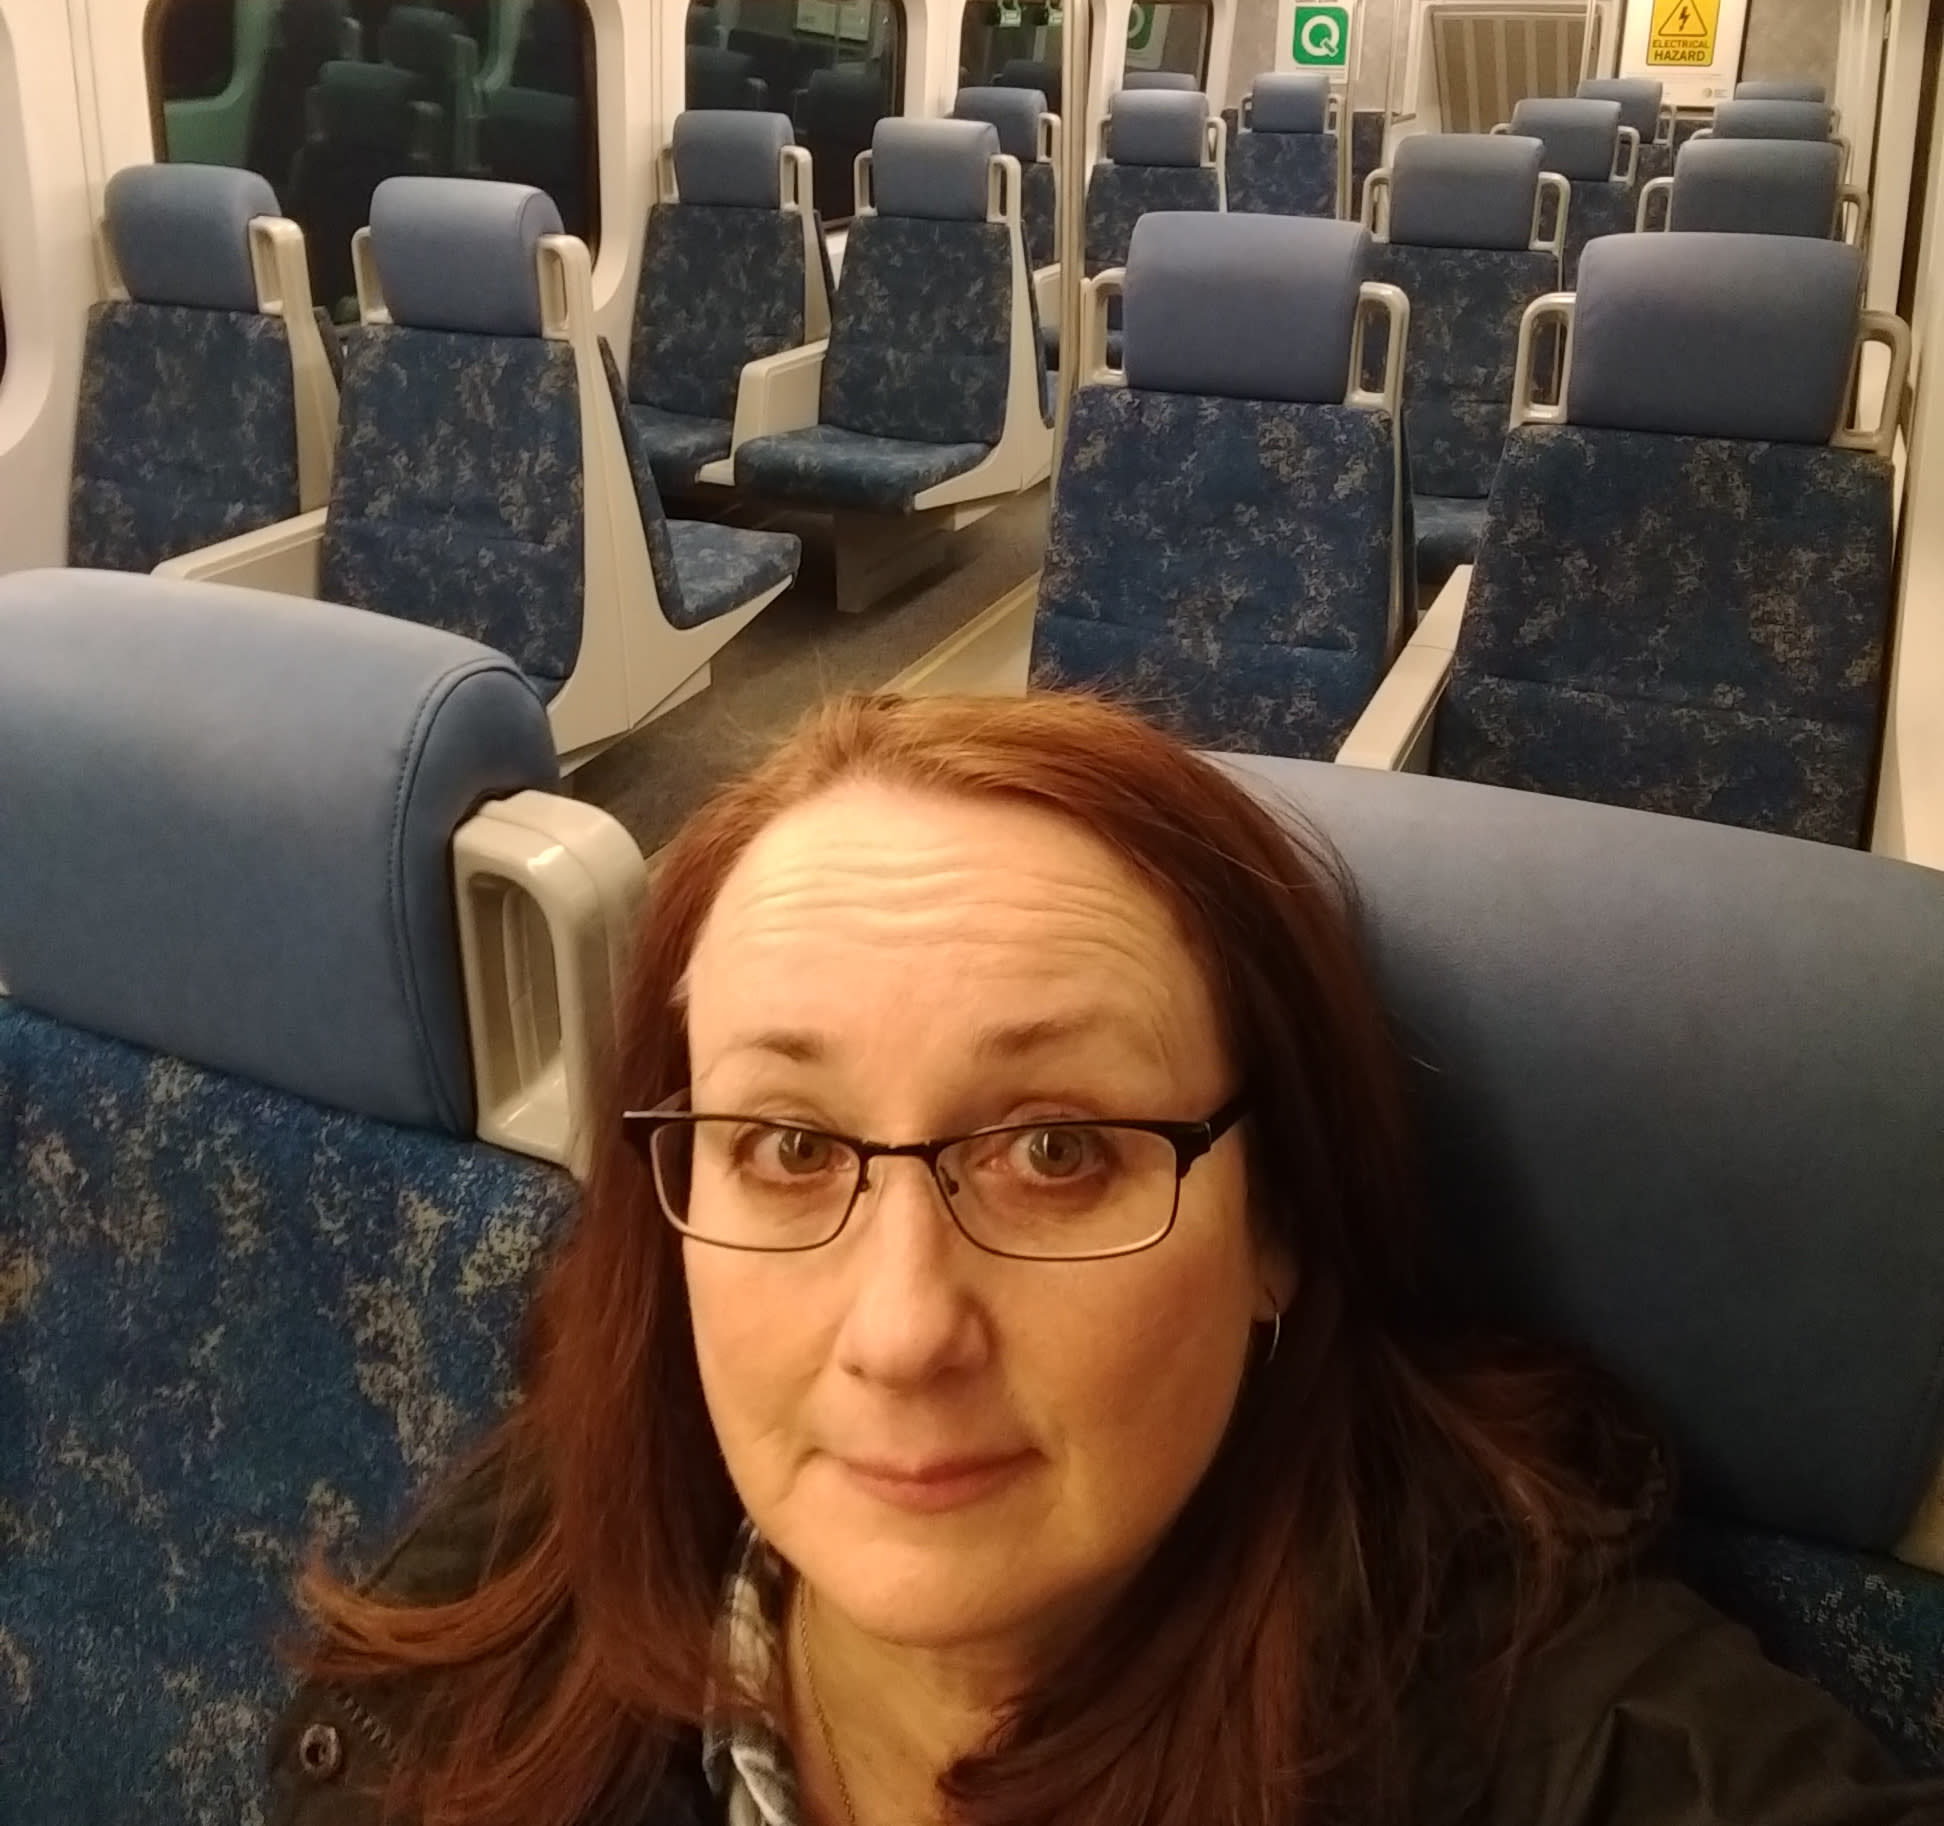 A GO customer takes a self of herself sitting in an empty train